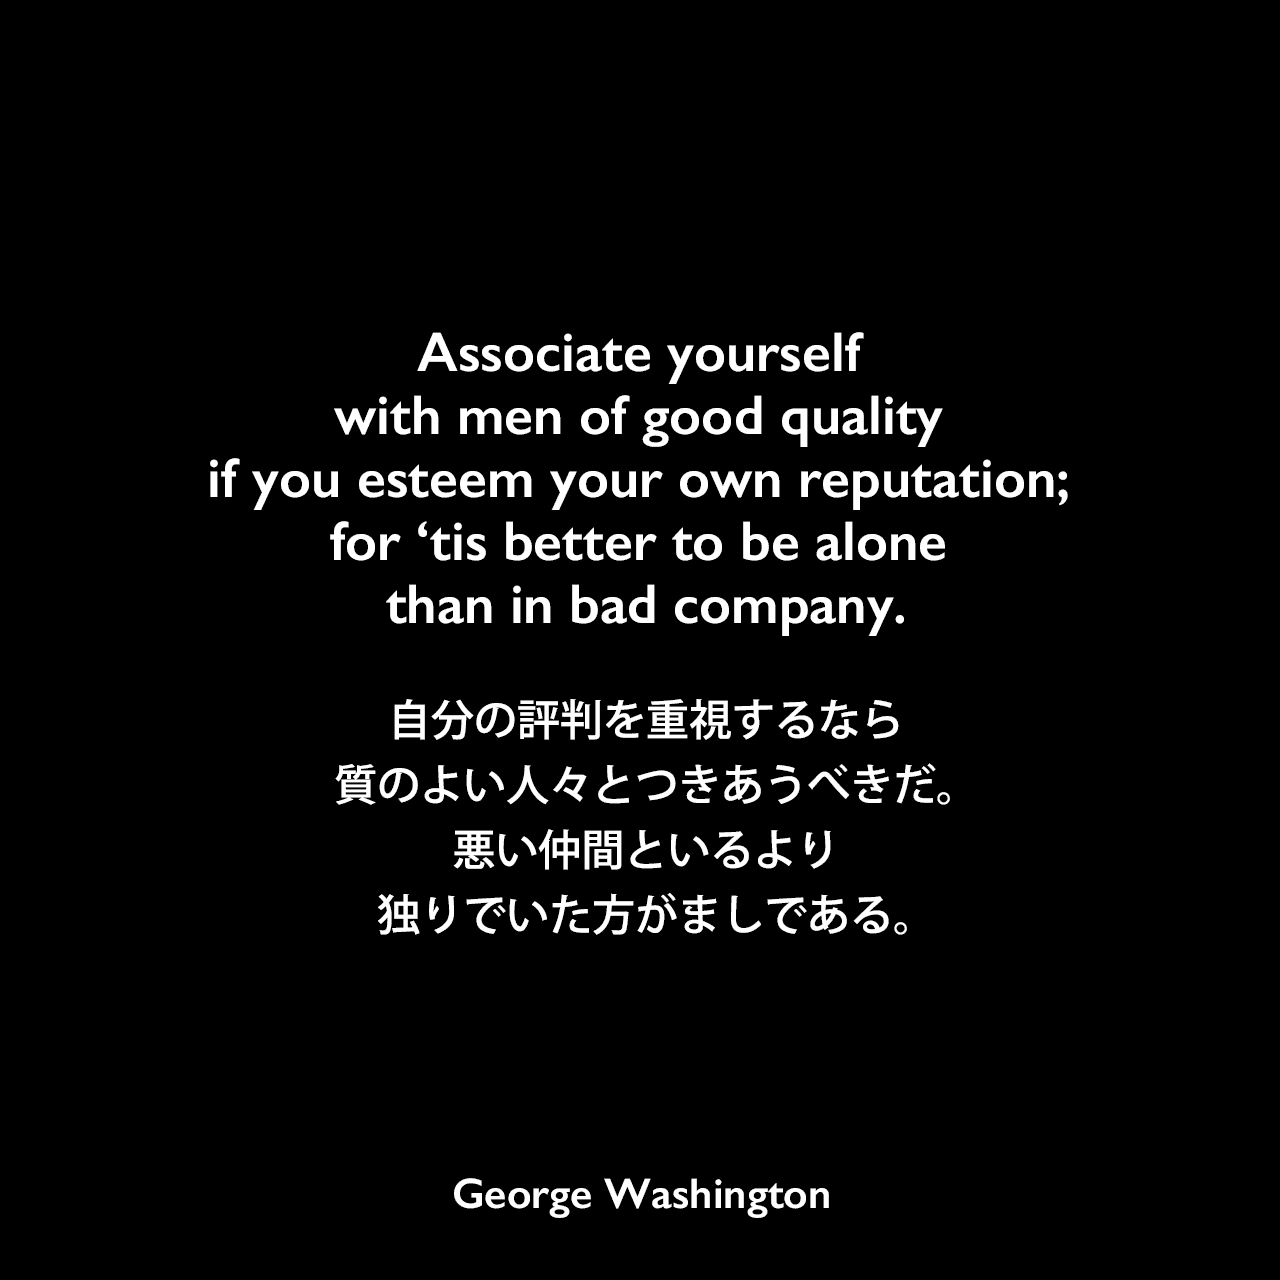 Associate yourself with men of good quality if you esteem your own reputation; for ‘tis better to be alone than in bad company.自分の評判を重視するなら、質のよい人々とつきあうべきだ。悪い仲間といるより、独りでいた方がましである。George Washington